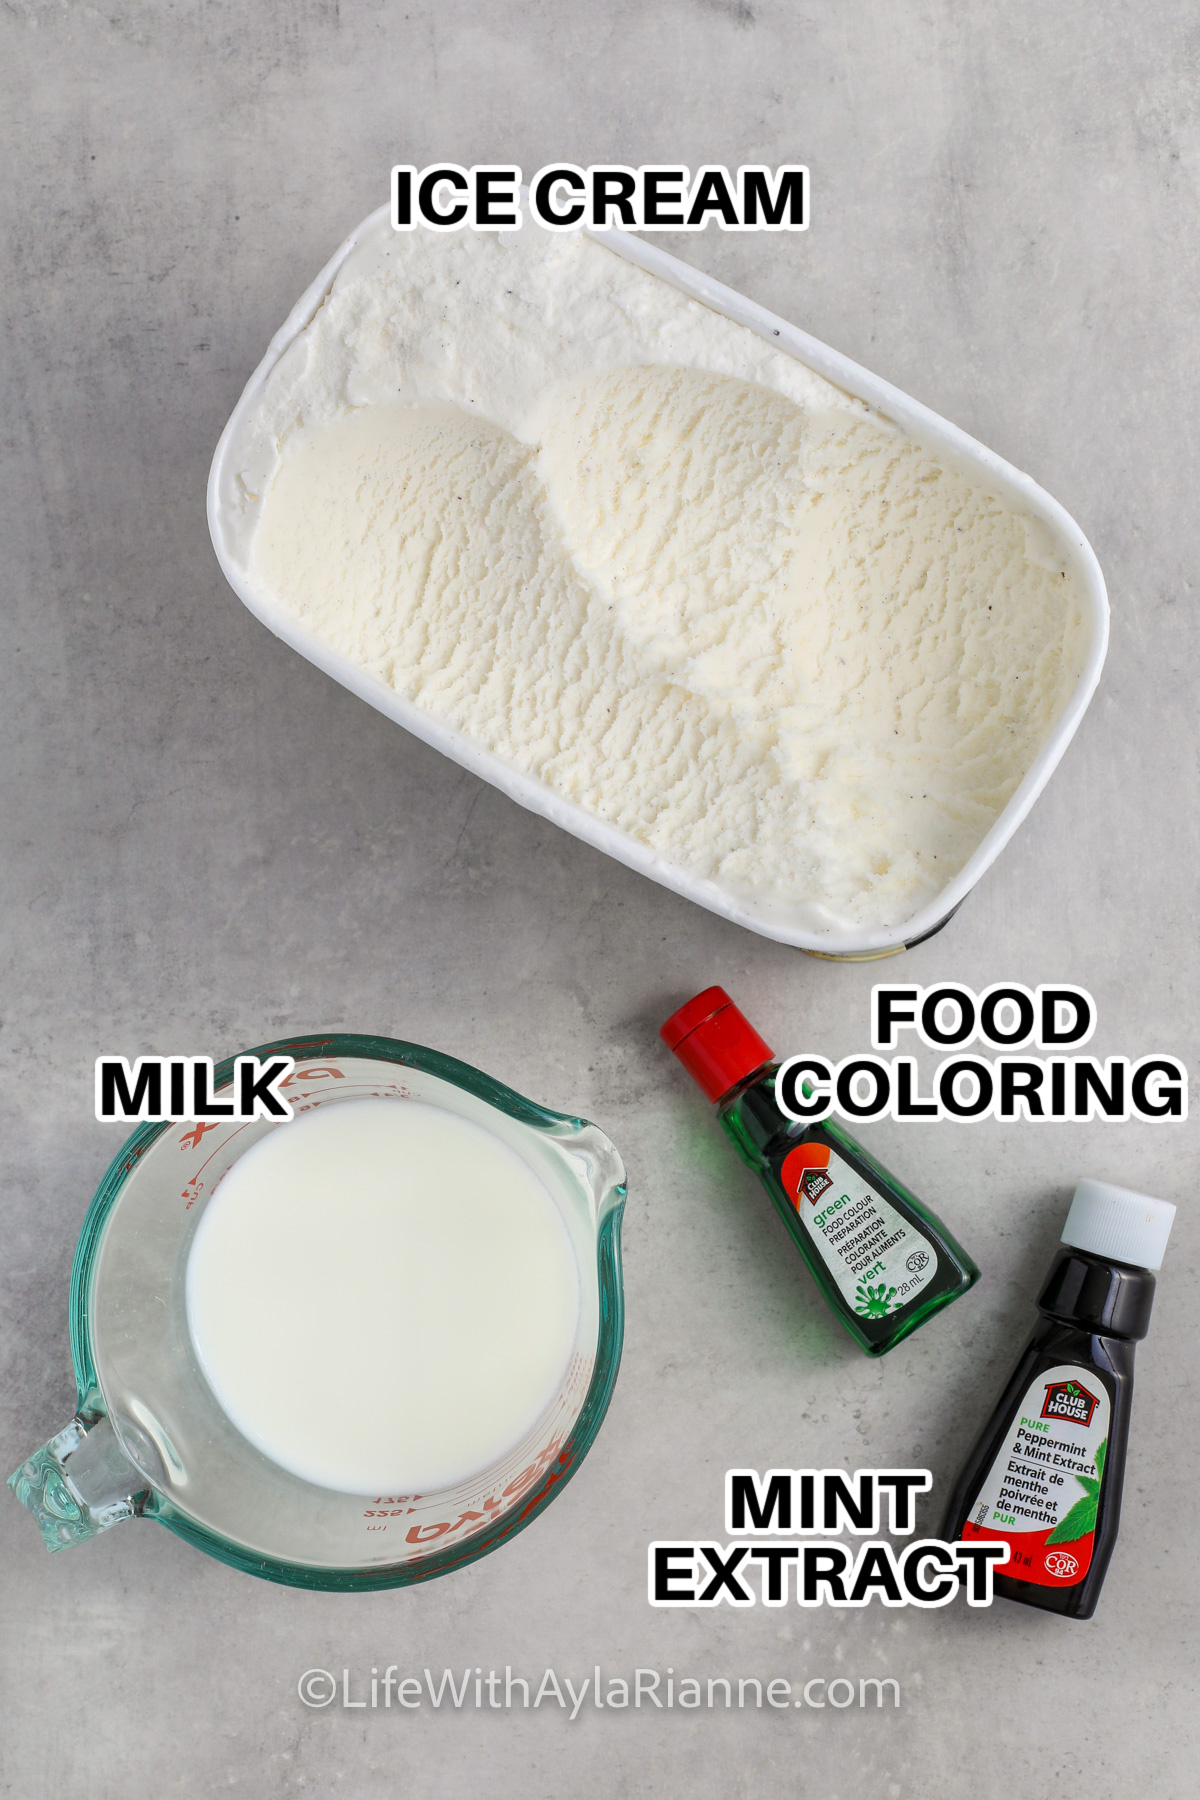 Ingredients to make a copycat shamrock shake labeled: ice cream, milk, food coloring, and mint extract. 